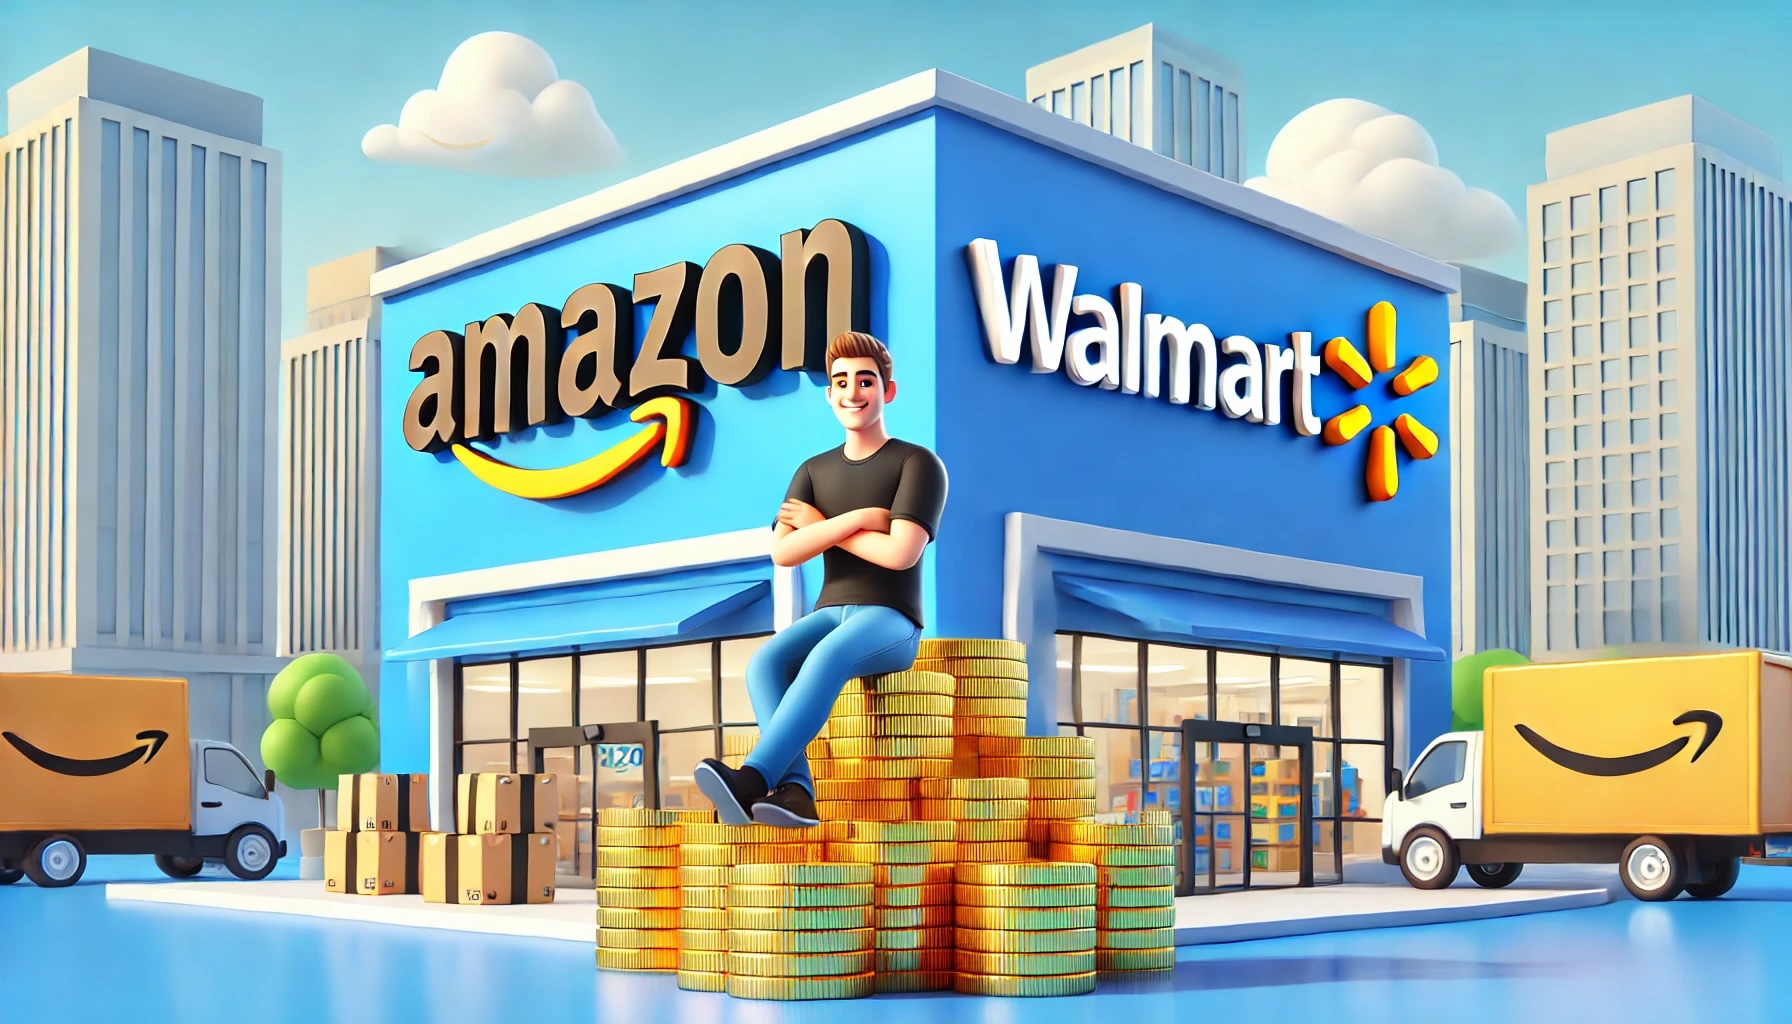 A stylized image of an ecommerce seller sitting on a big pile of gold in front of a large store with Amazon and Walmart logos. It captures the essence of success and prosperity in ecommerce.